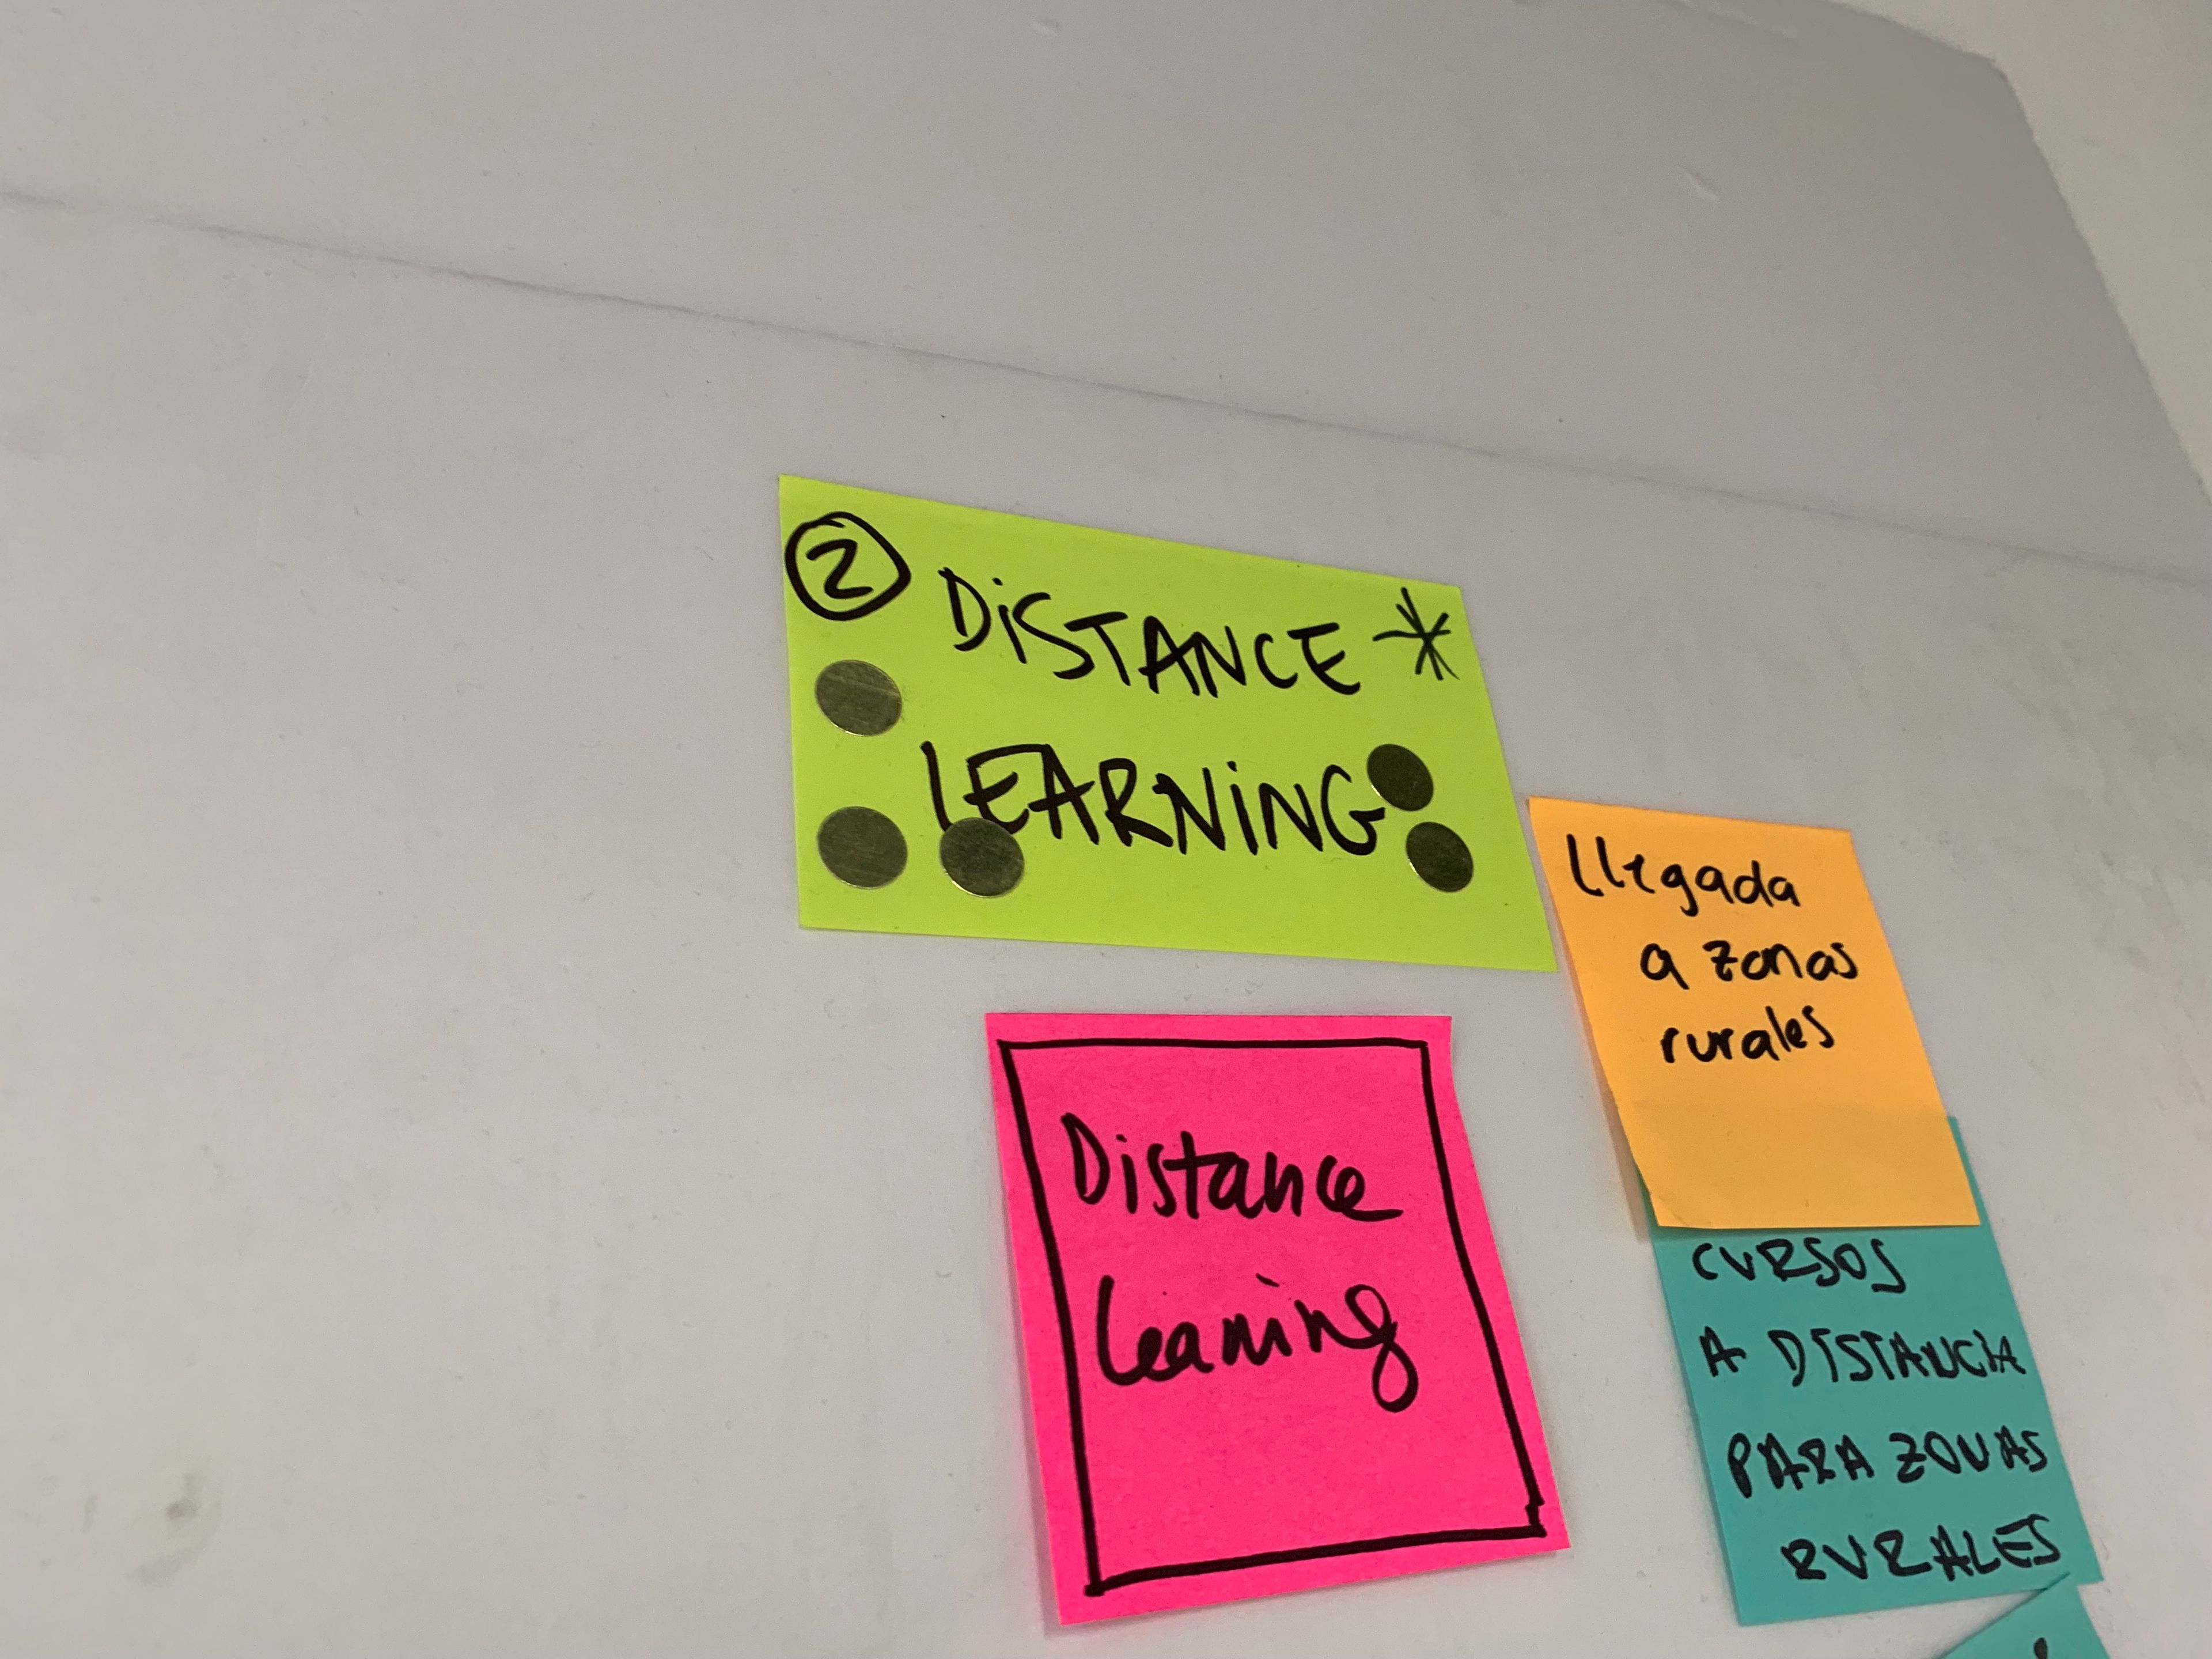 Post-it notes mapping some key ideas